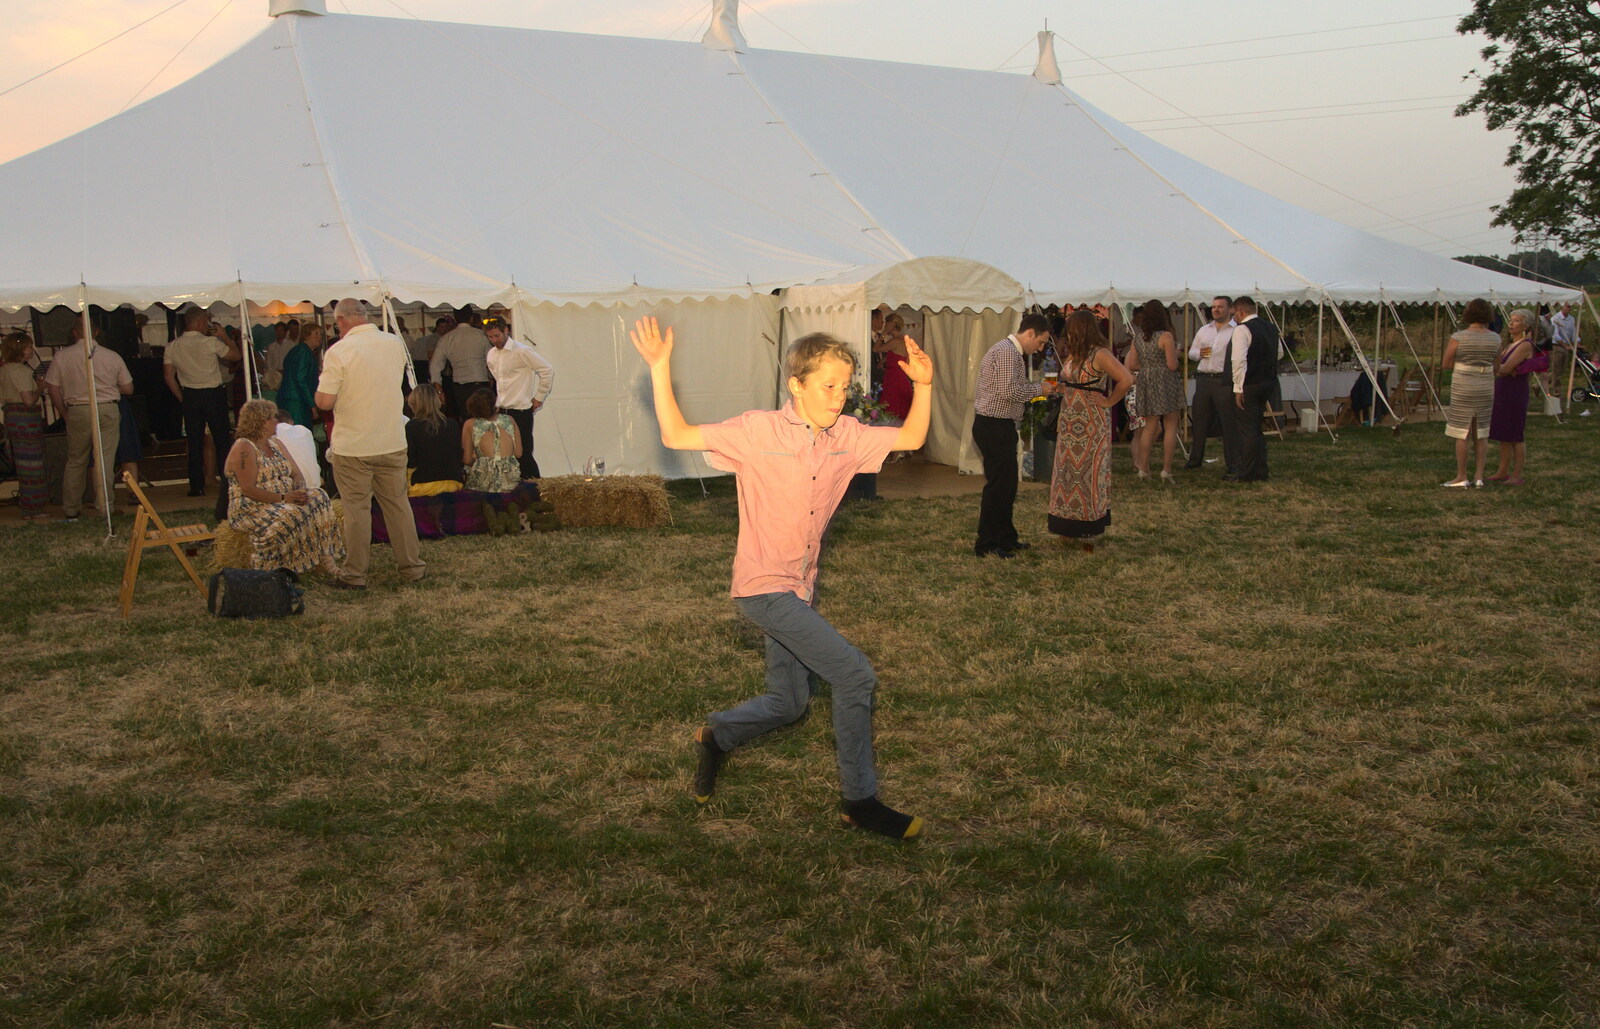 A small boy runs past and leaps in to the air from The BBs Play Steph's Wedding, Burston, Norfolk - 13th July 2013